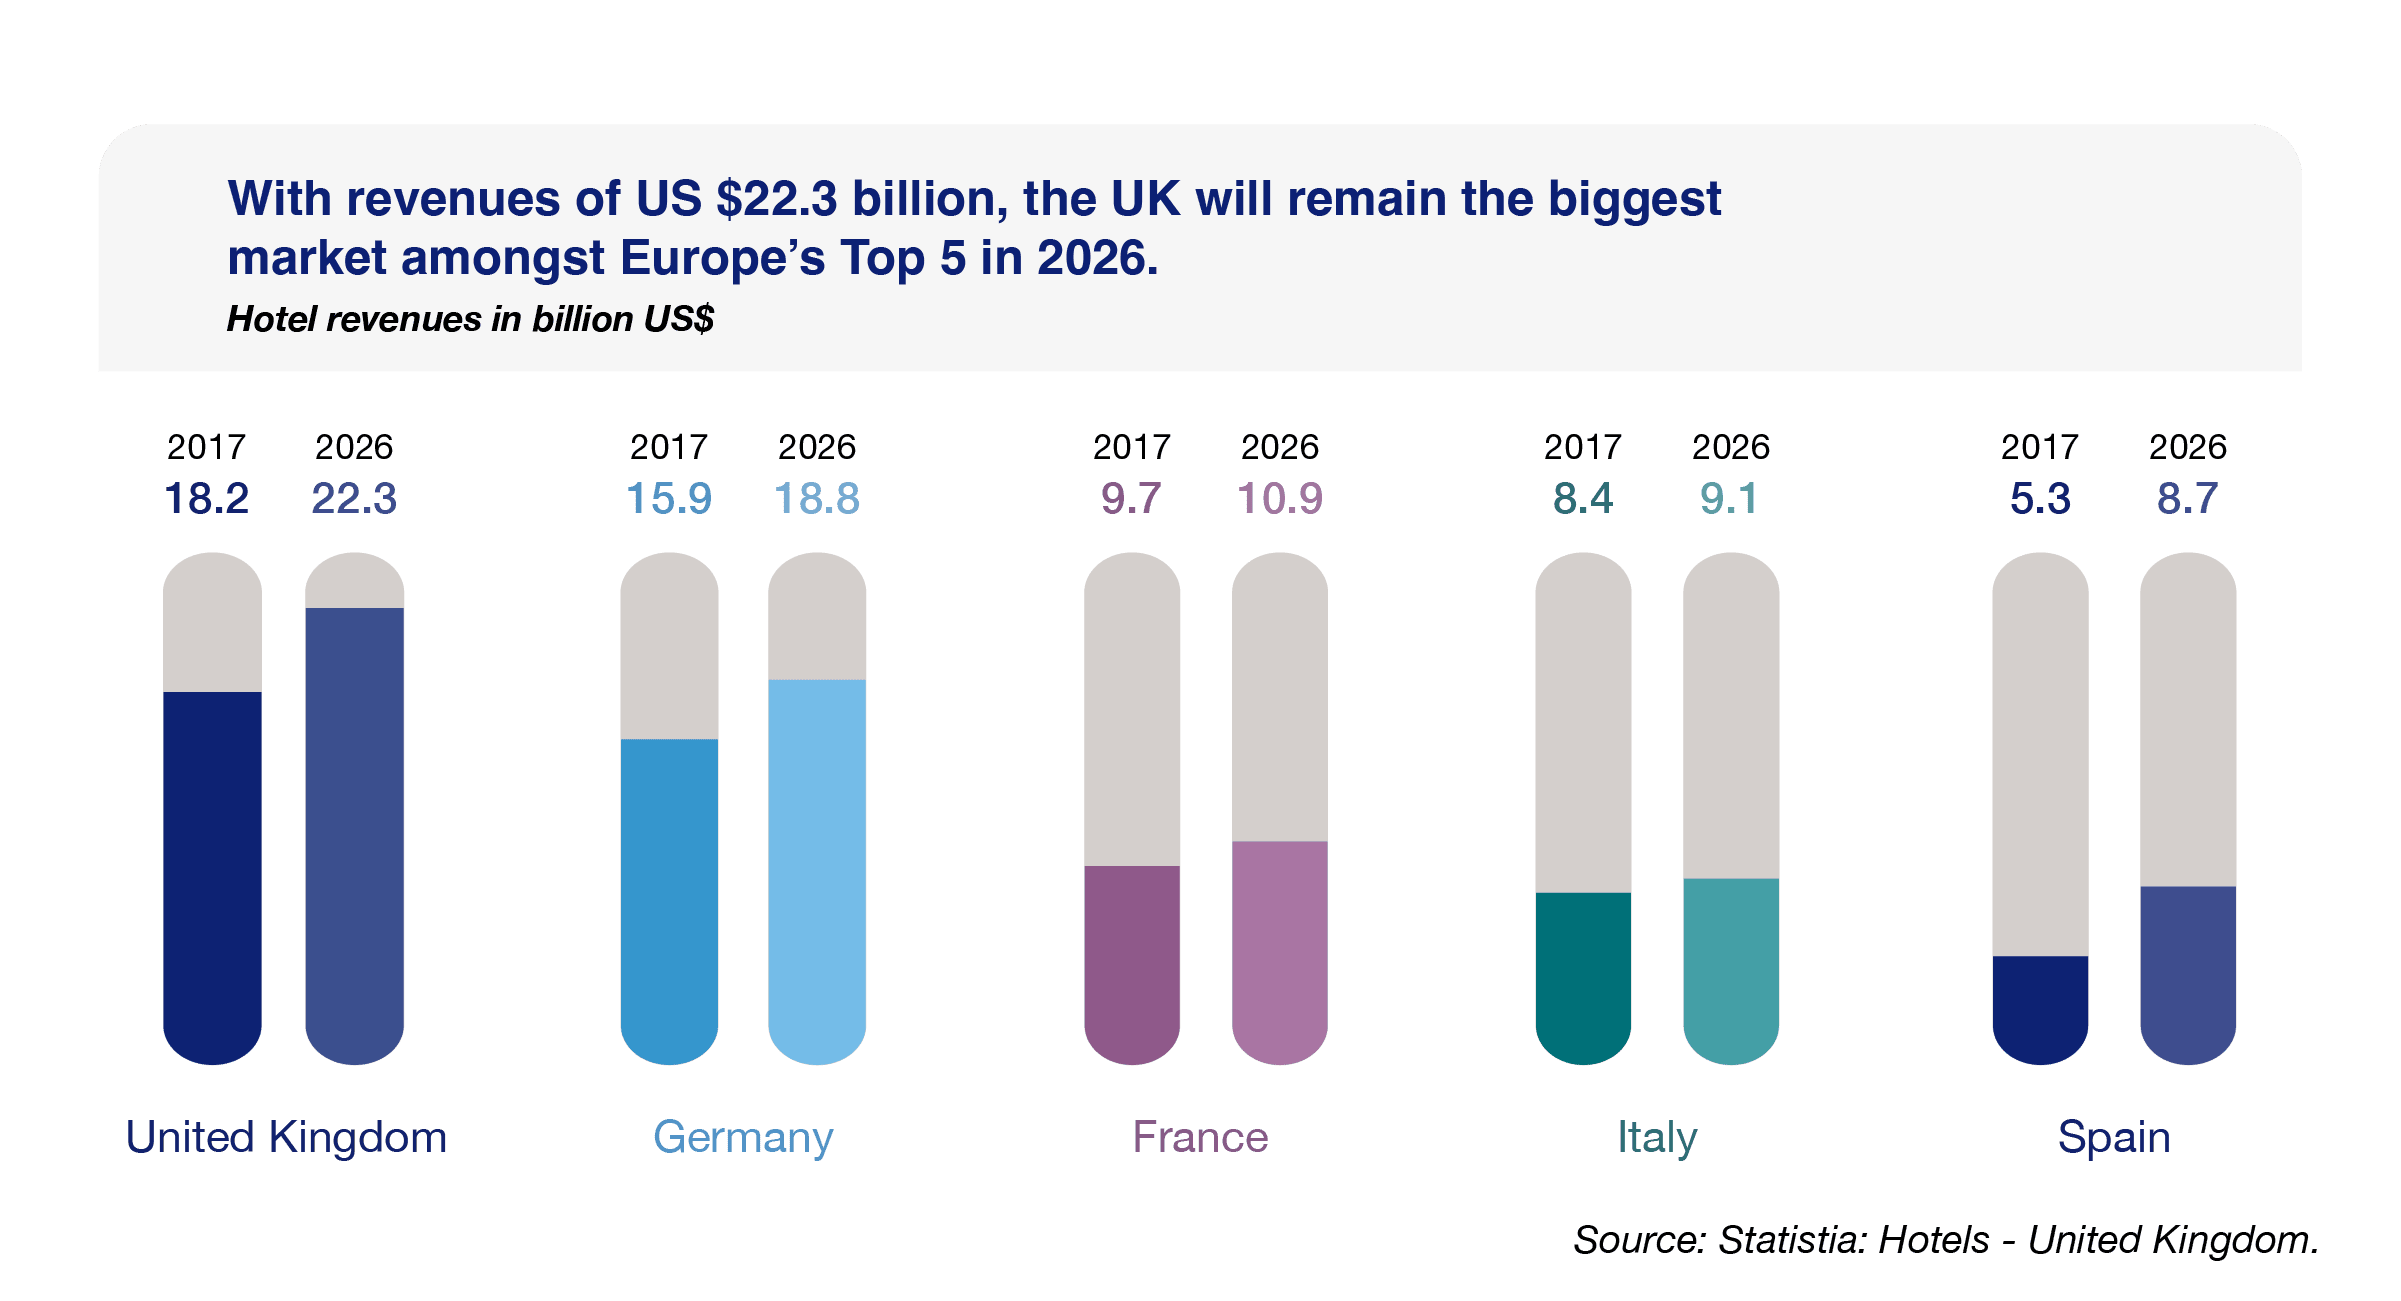 With revenues of US $22.3 billion, the UK will remain the biggest market amongst Europe’s Top 5 in 2026.